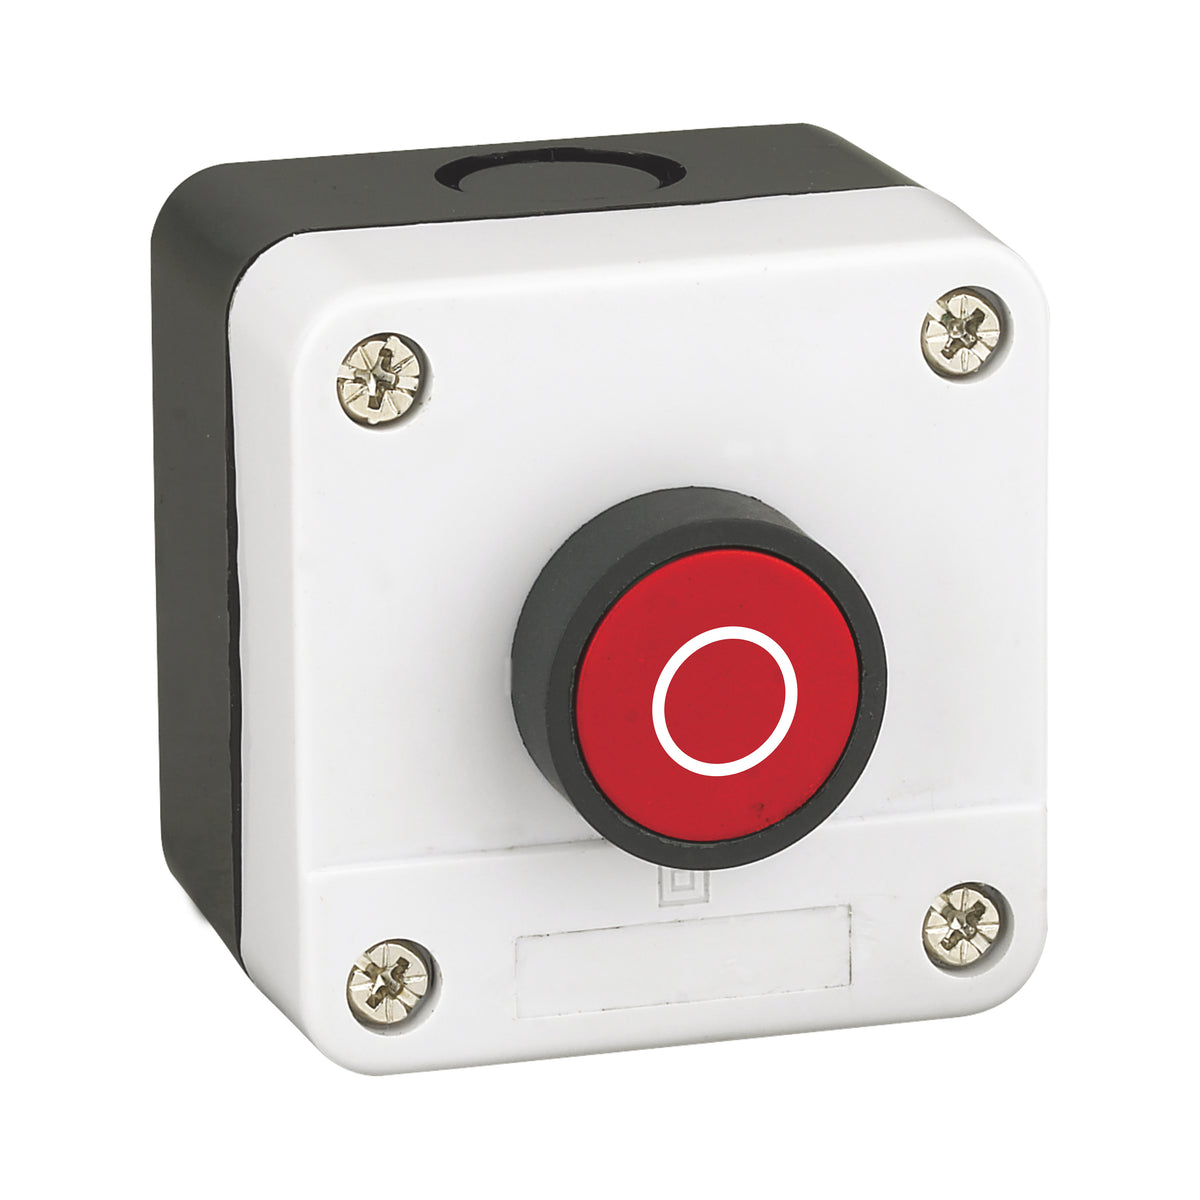 1-Hole Push Button Box Red Button with Symbol 'o'